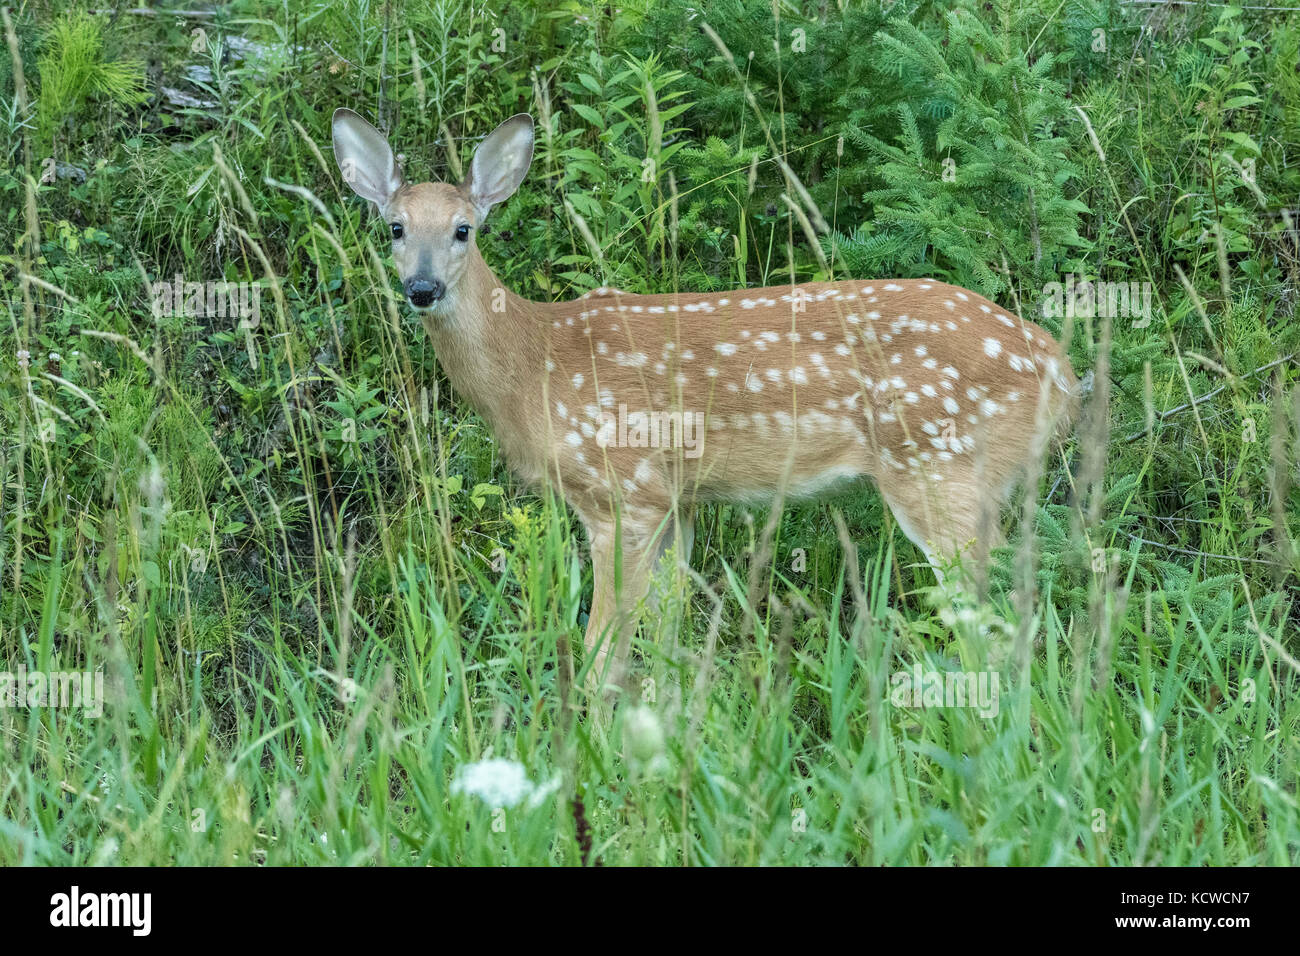 White-tailed deer fawn (Lepus americanus), Whitefish Falls, Ontario, canada Banque D'Images